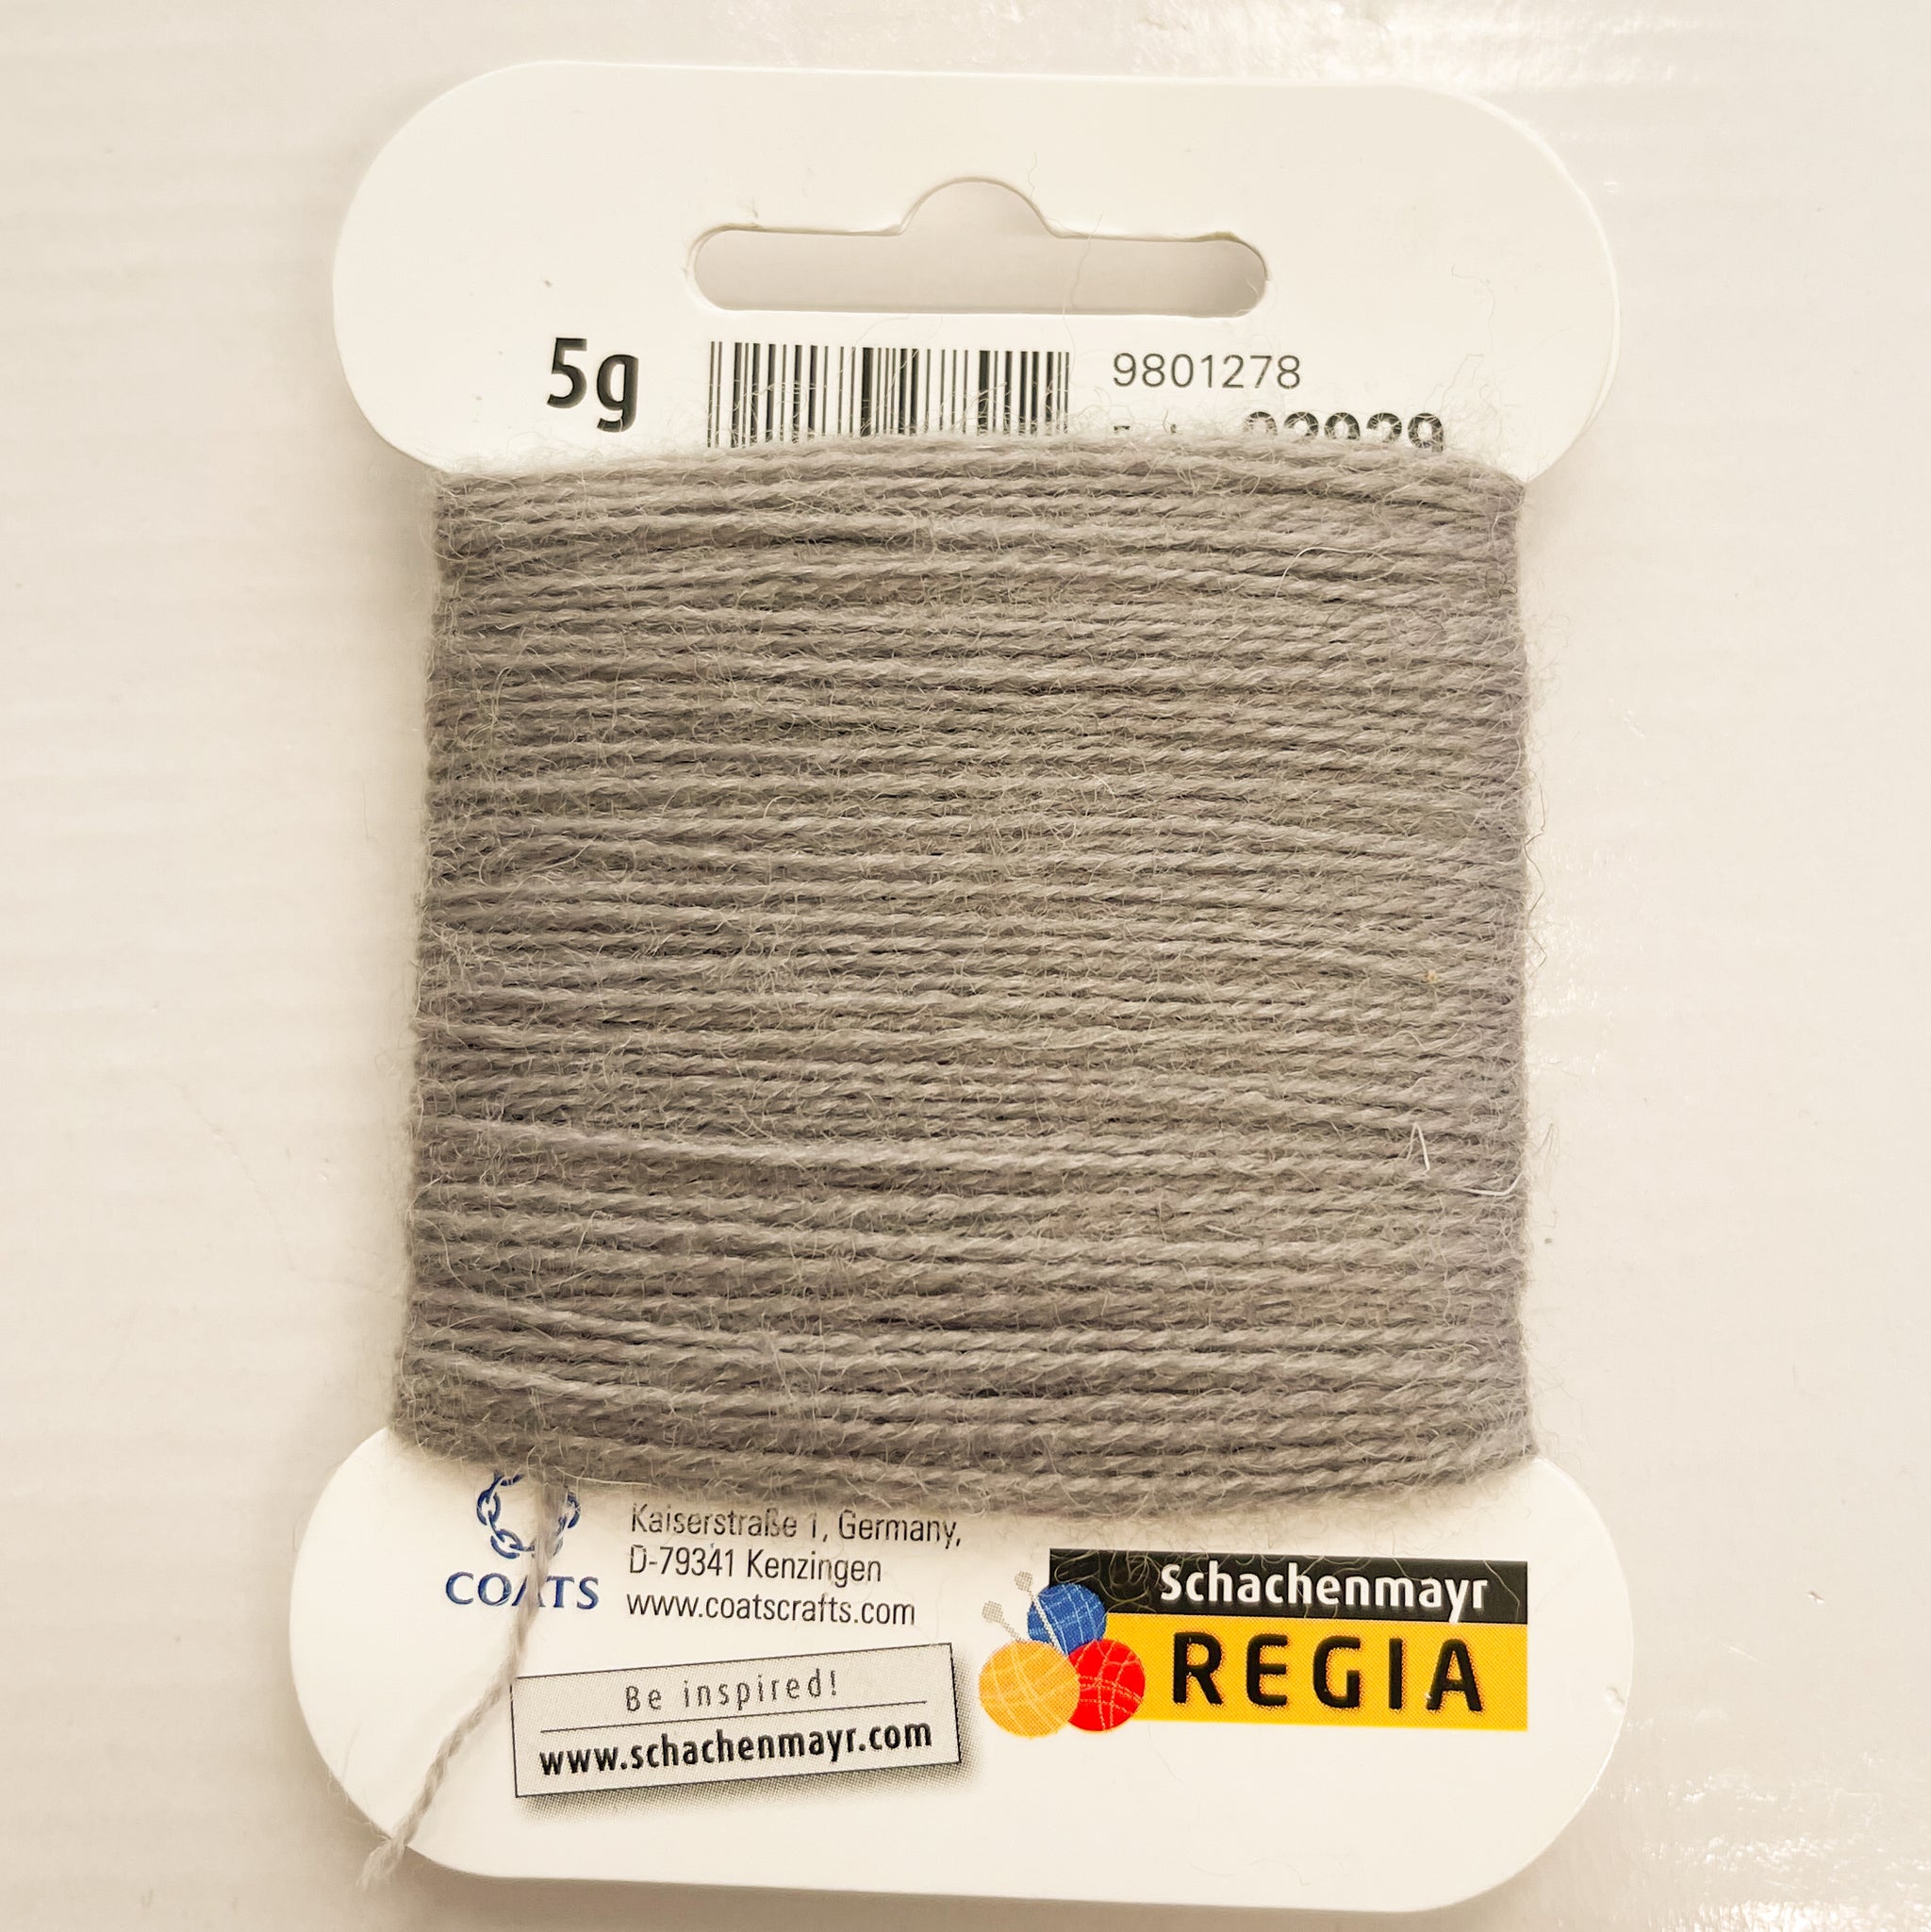 Regia Sock Darning and Reinforcer Yarn - The Websters